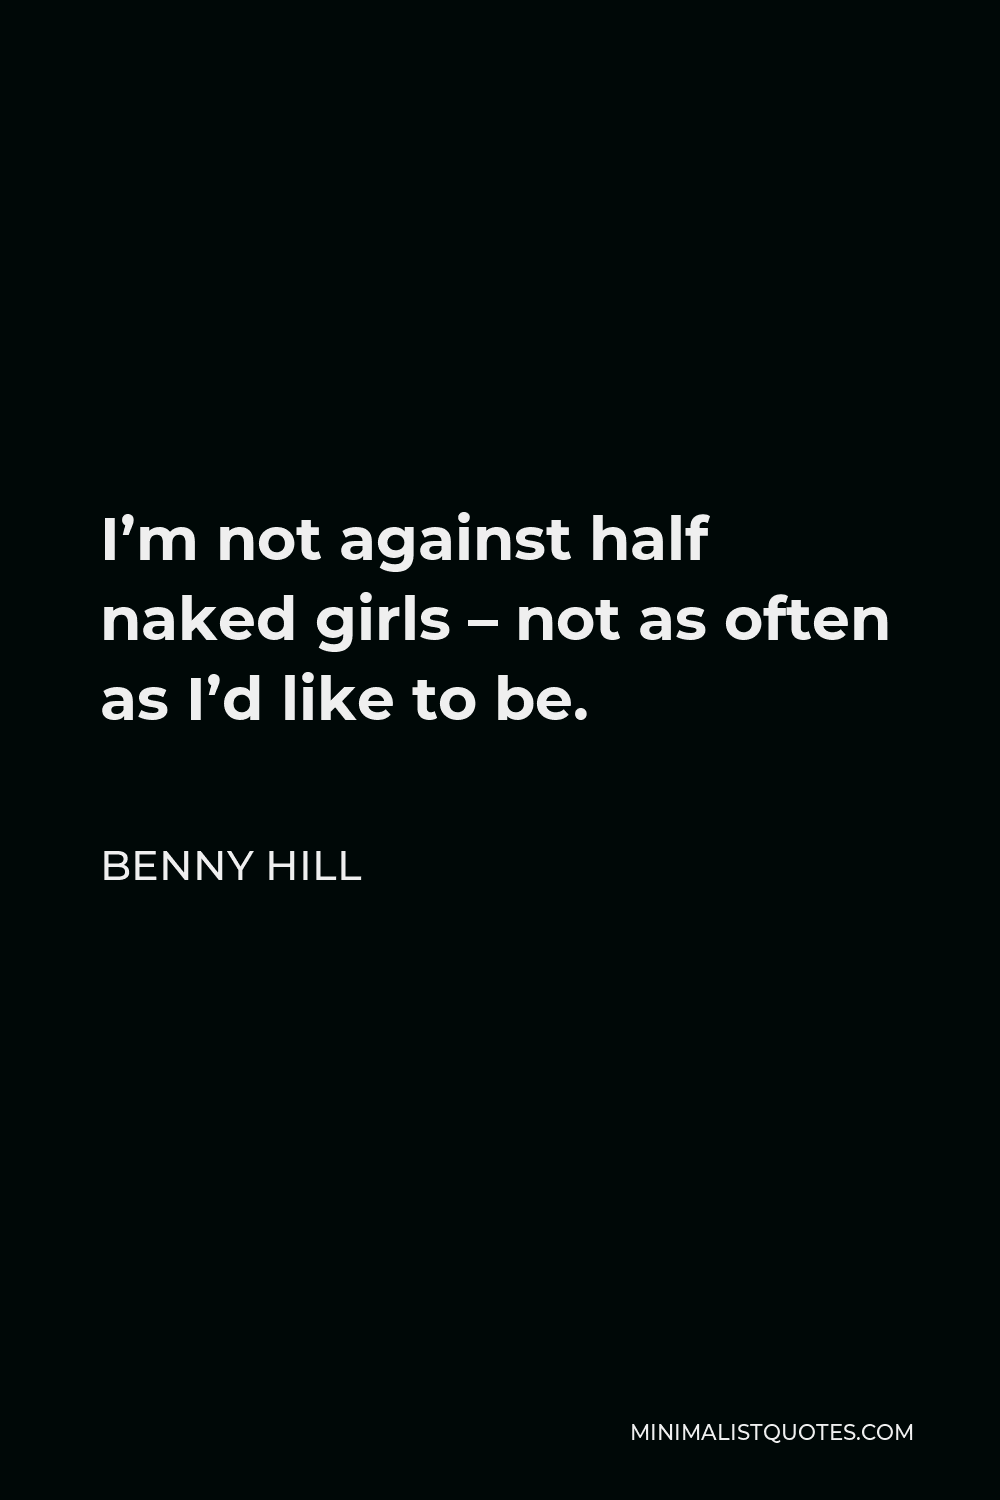 Benny Hill Quote Im Not Against Half Naked Girls Not As Often As Id Like To Be